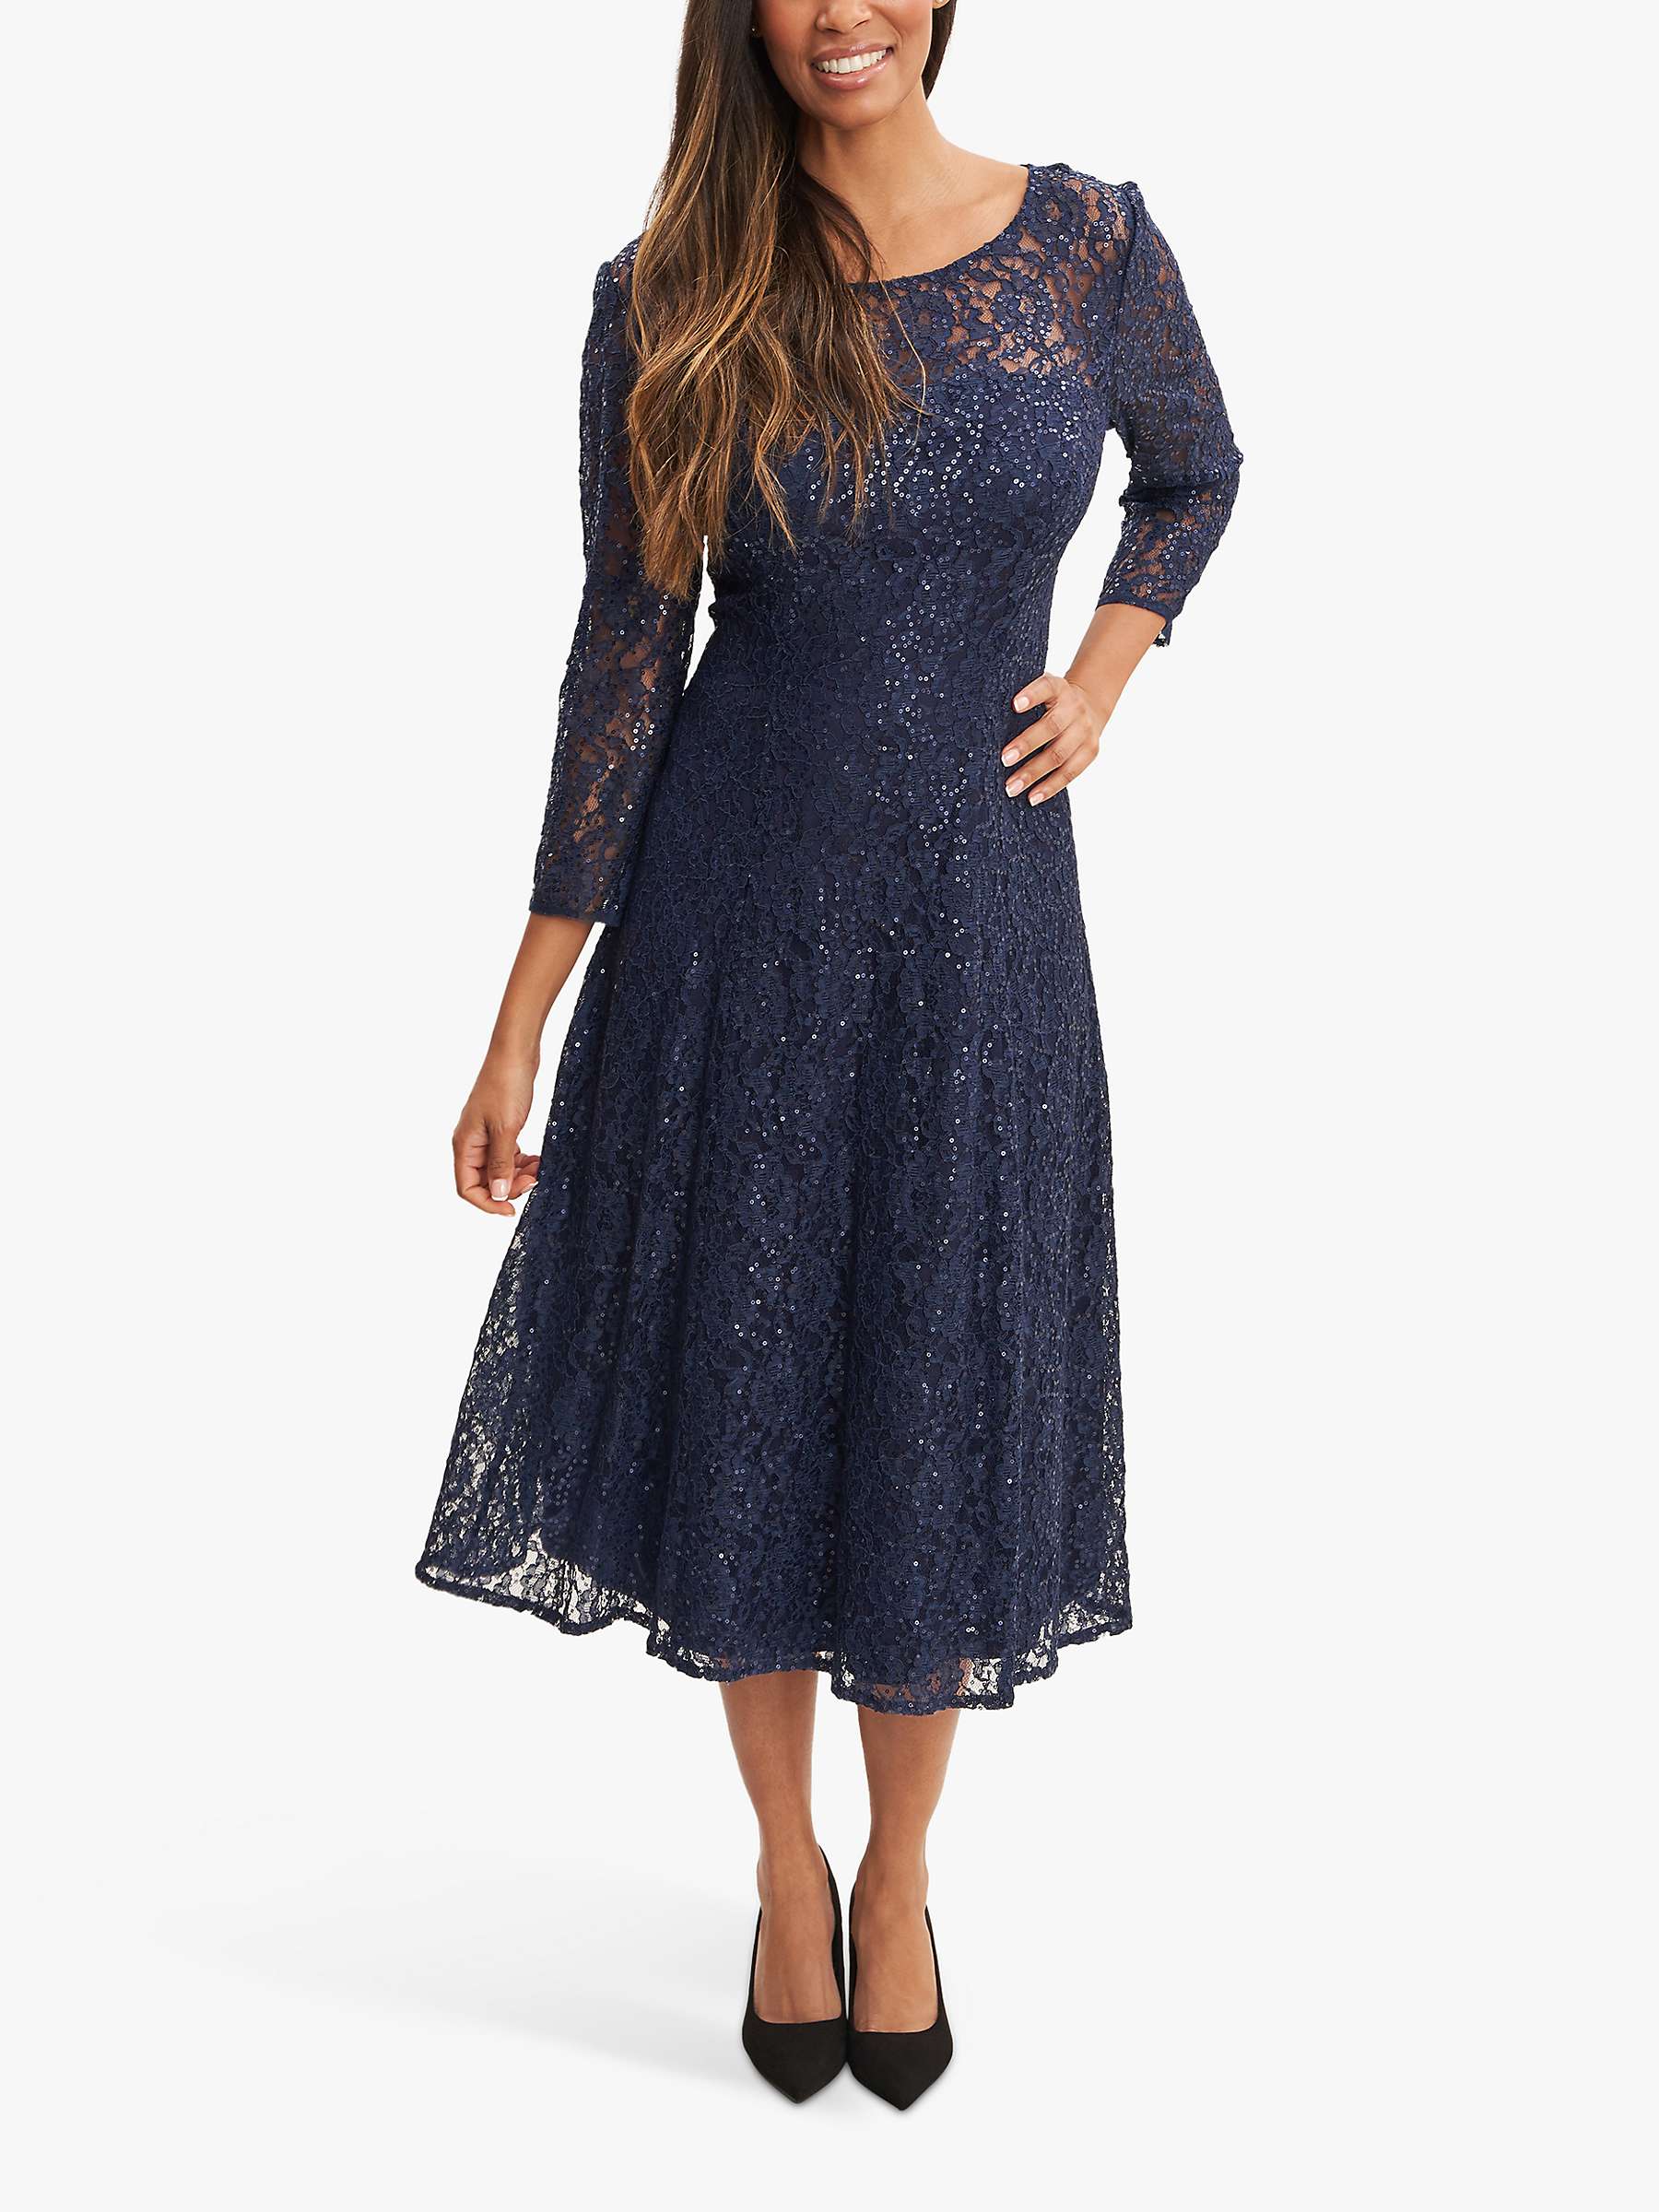 Buy Gina Bacconi Elianna Floral Lace Sequin Midi Dress, Navy Online at johnlewis.com